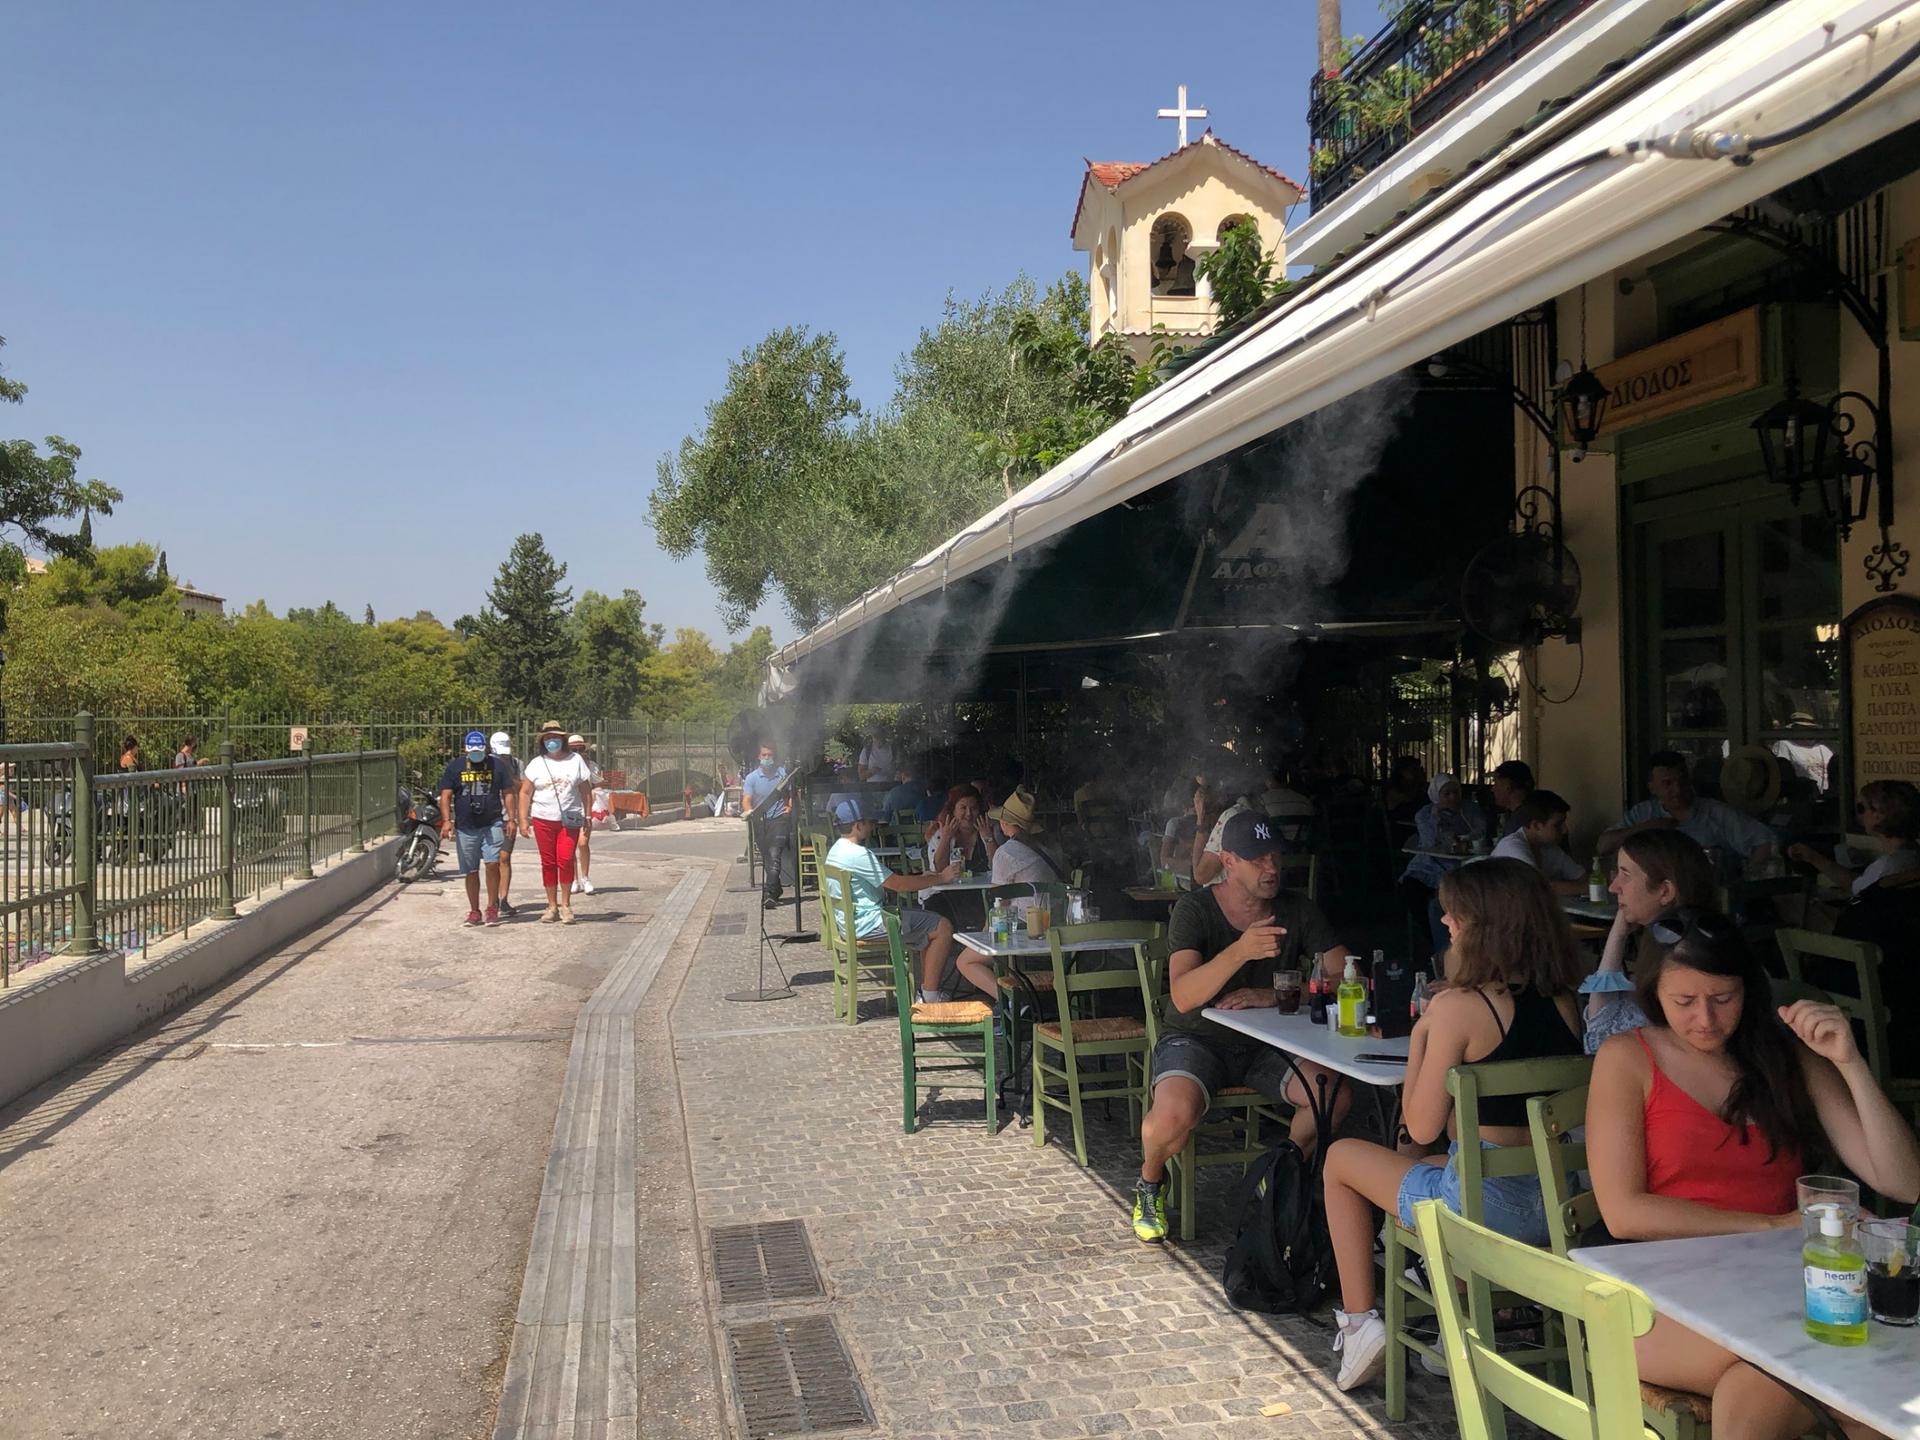 Patrons of a open-air restaurant are shown with several spigots at the roof line spraying mist.